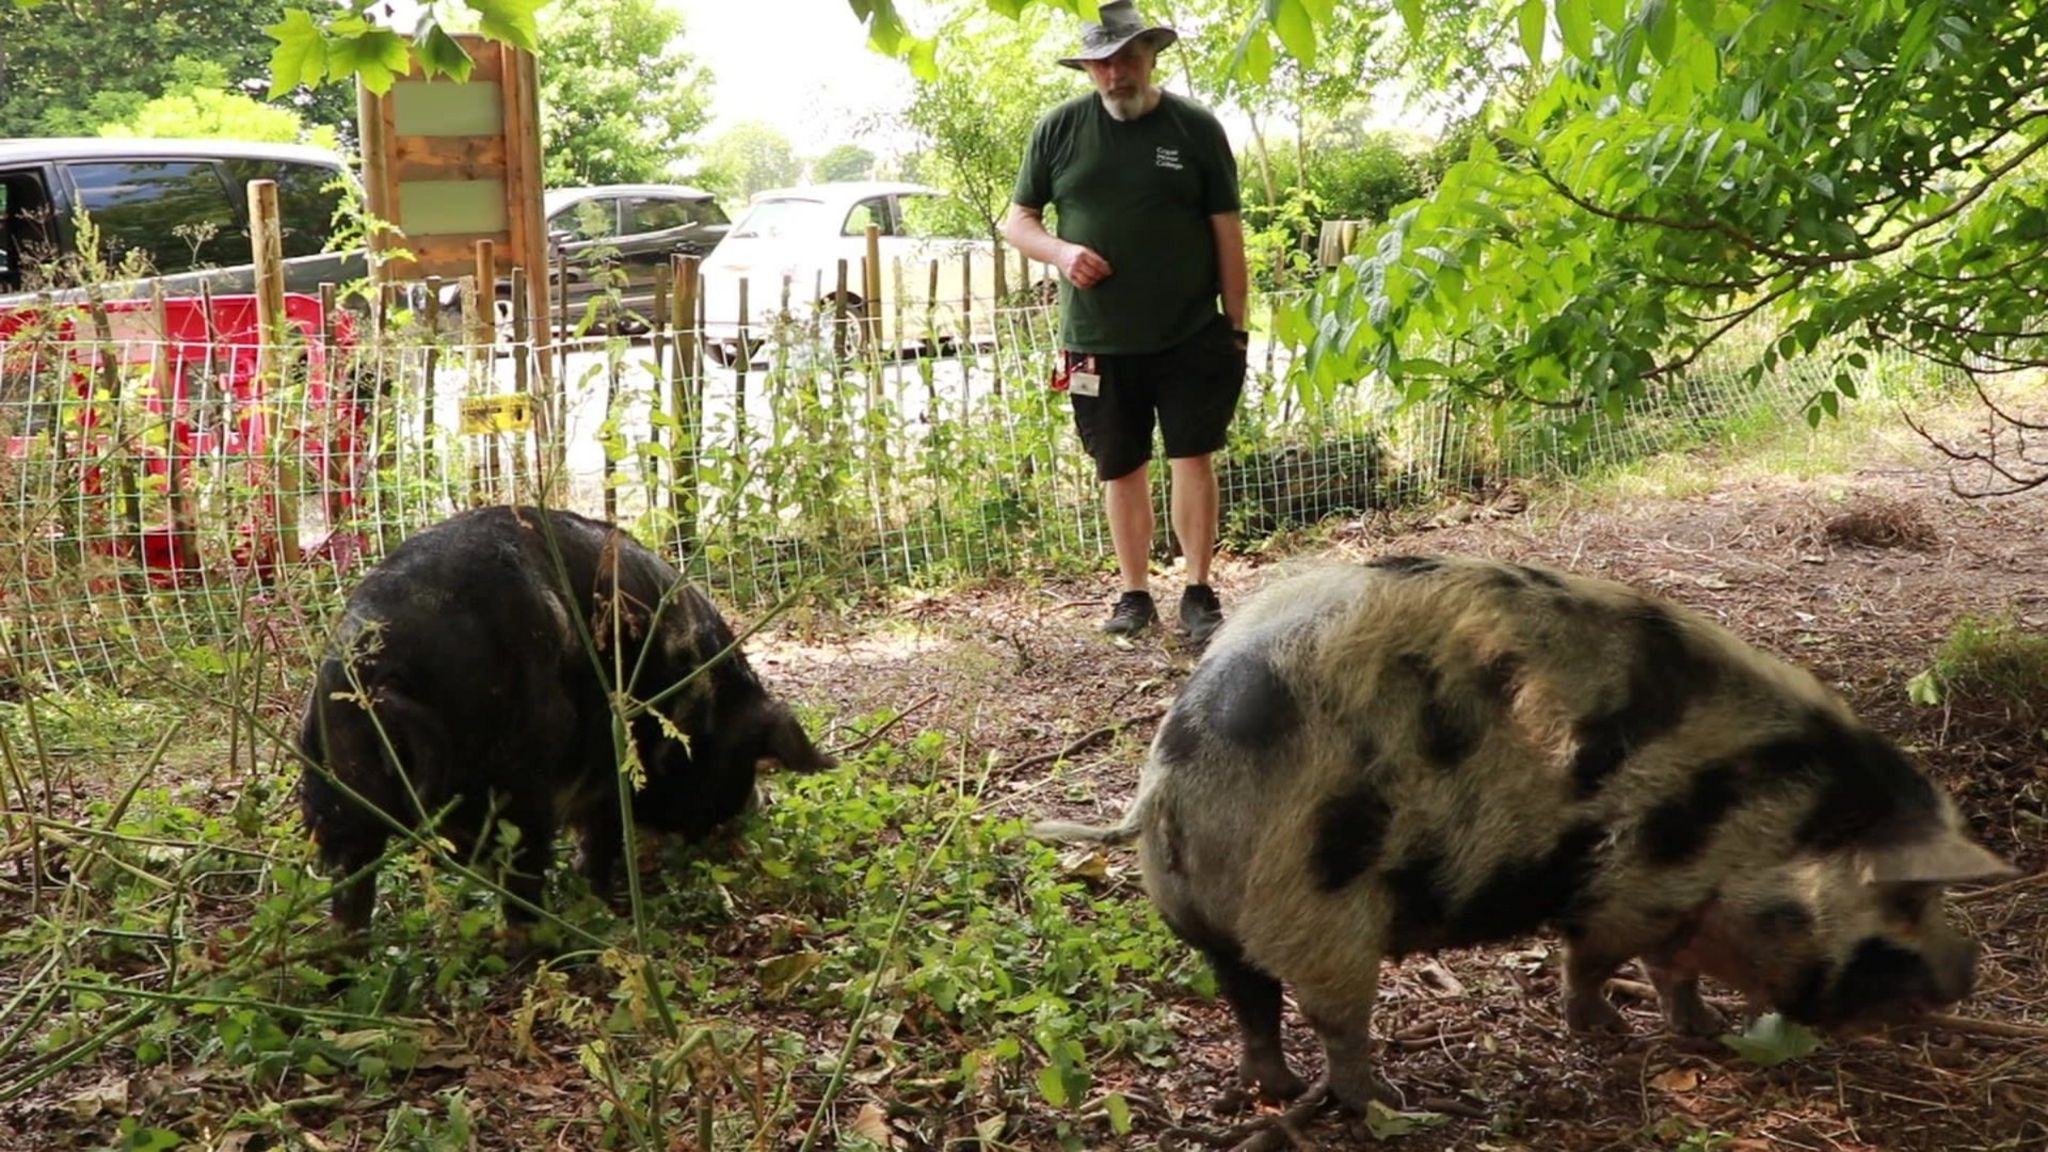 Two pigs in a pen, one is dark coloured and the other is a light colour with black spots